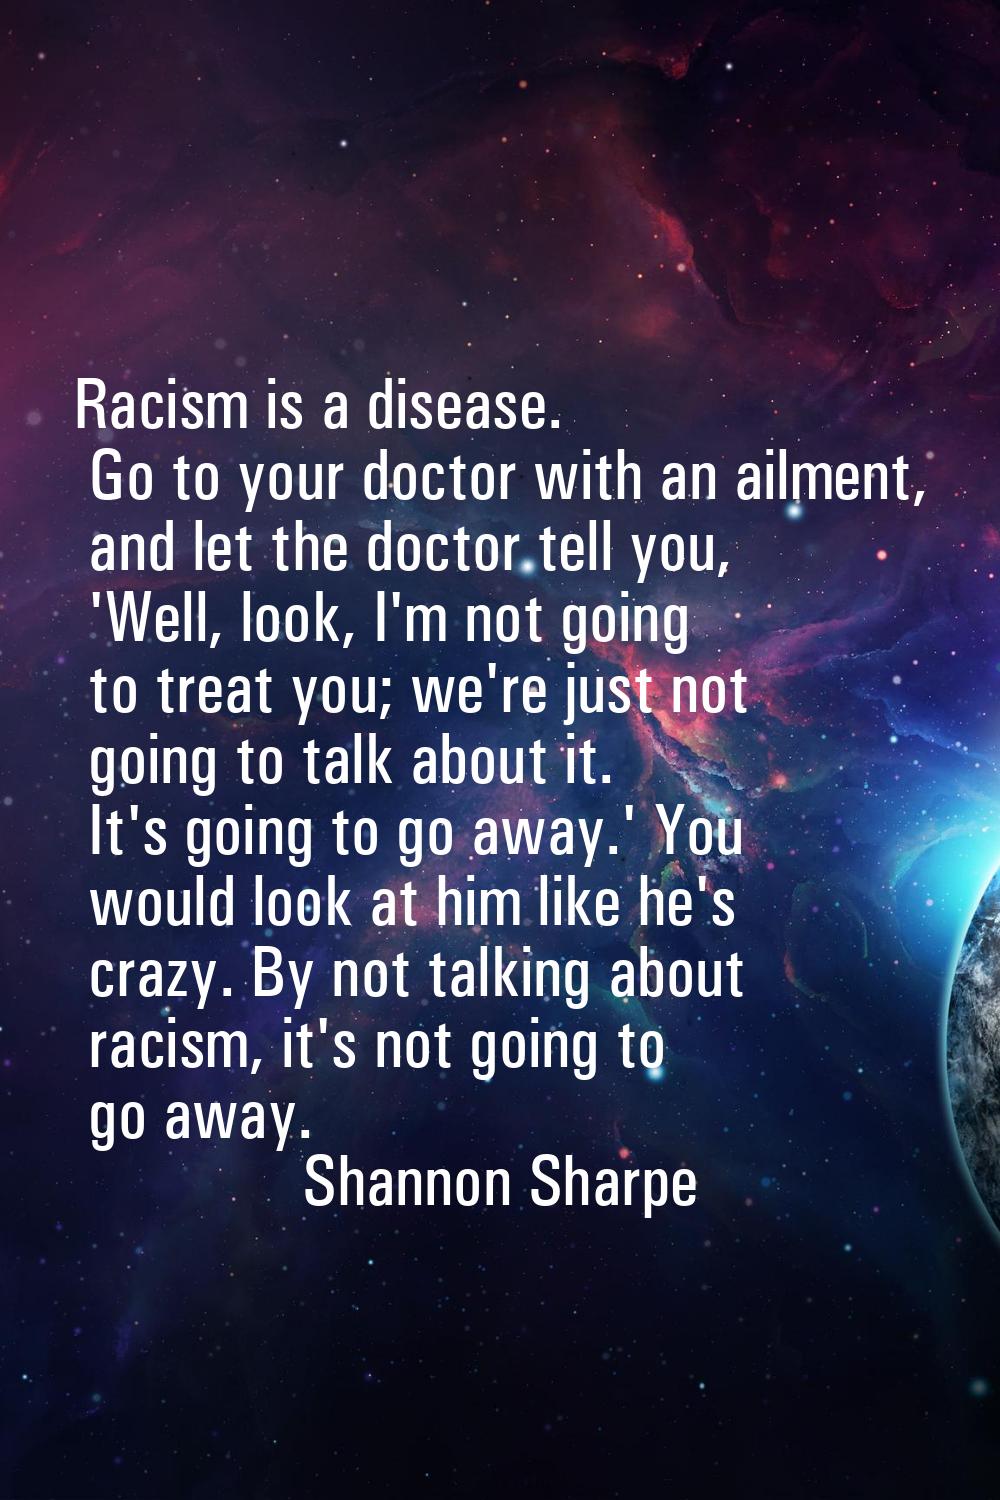 Racism is a disease. Go to your doctor with an ailment, and let the doctor tell you, 'Well, look, I